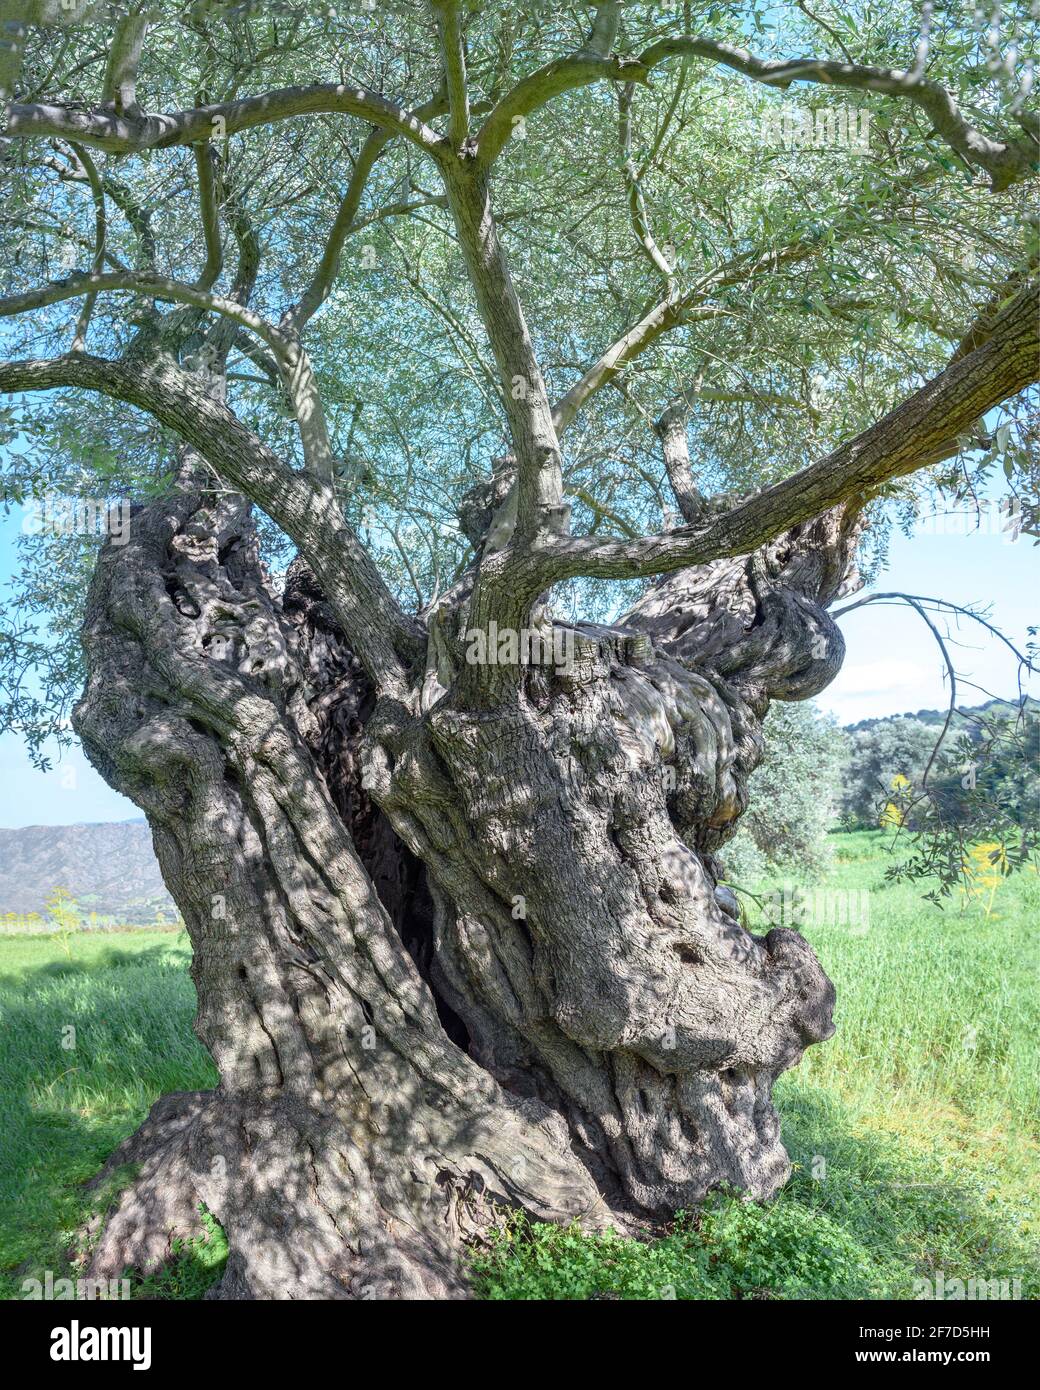 Ancient olive tree with cracked and deformed trunk in Lefkara, Cyprus Stock Photo